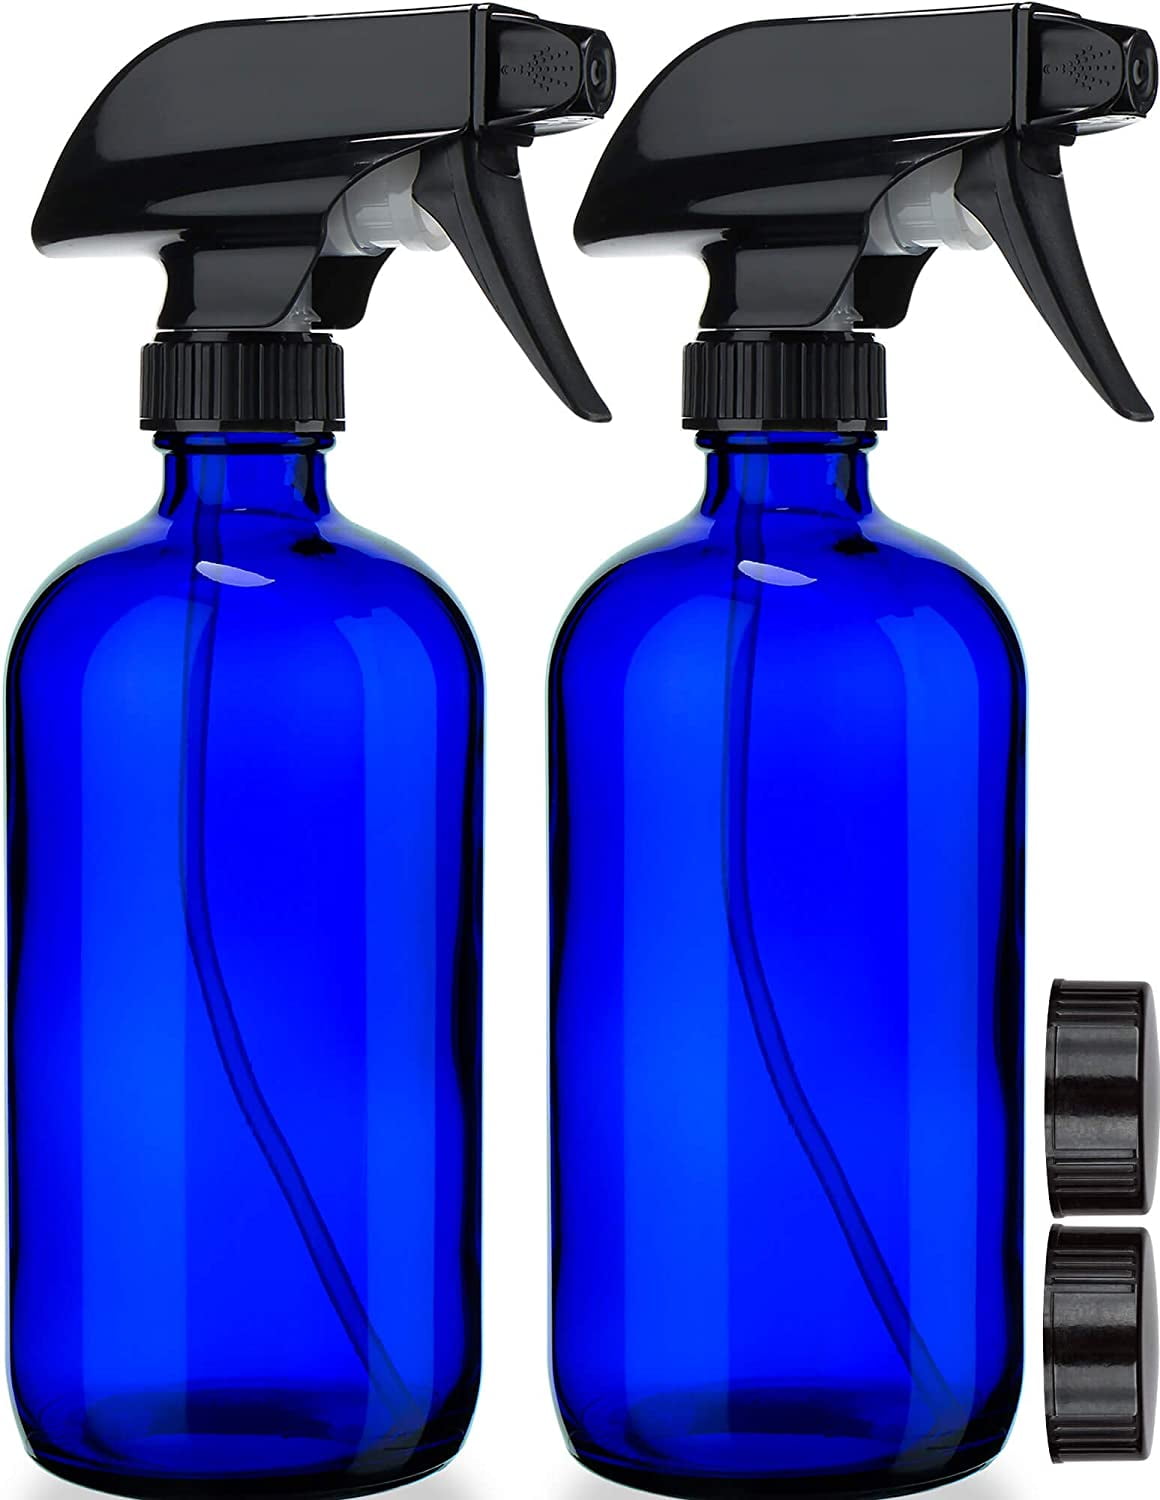 YAMYONE Plastic Spray Bottle 2 Pack 16 oz Bleach/Vinegar/Rubbing Alcohol Safe Professional Heavy Duty Empty Spraying Bottles Sprayer Cleaning Solutions Mist Squirt Water Bottles with Measurements 